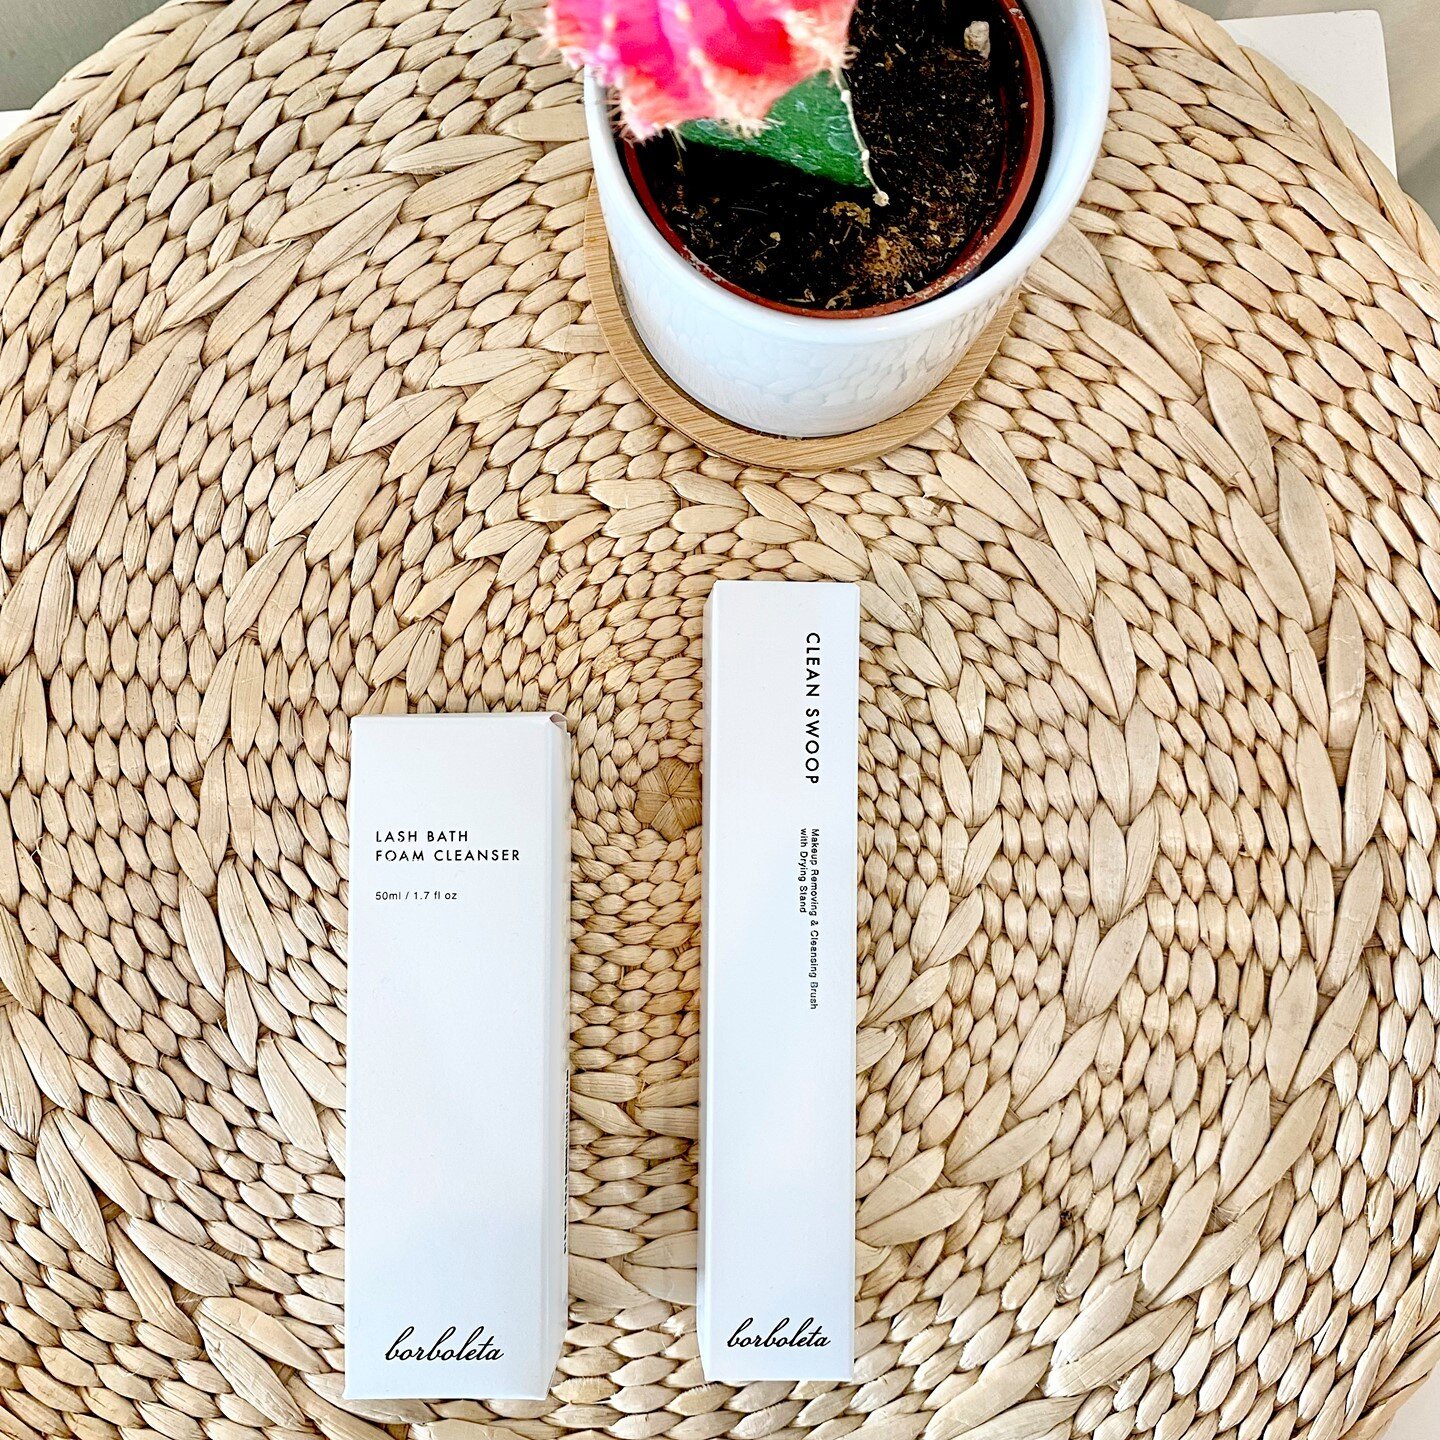 Lash Extension Essentials Kit ✨

Lash Bath: 
Formulated with targeted ingredients like moisture-binding hyaluronic acid and amino acids to replenish and hydrate for more youthful looking skin while strengthening and conditioning natural lashes.
 
Cle